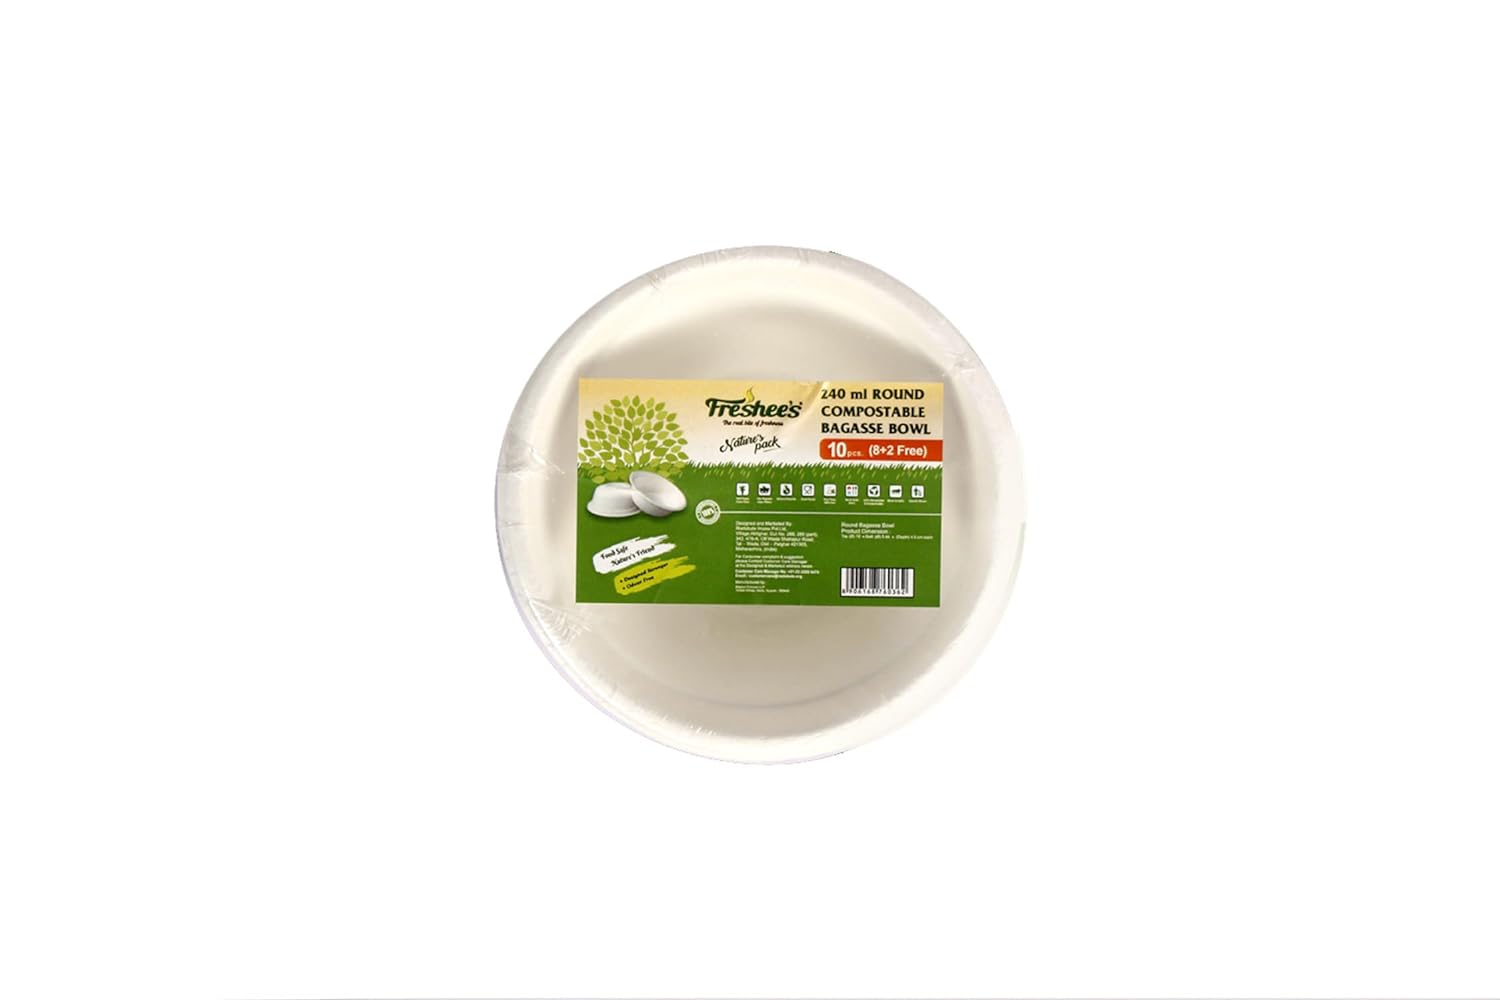 Freshee 240ml round Compostable Bagasse Bowl